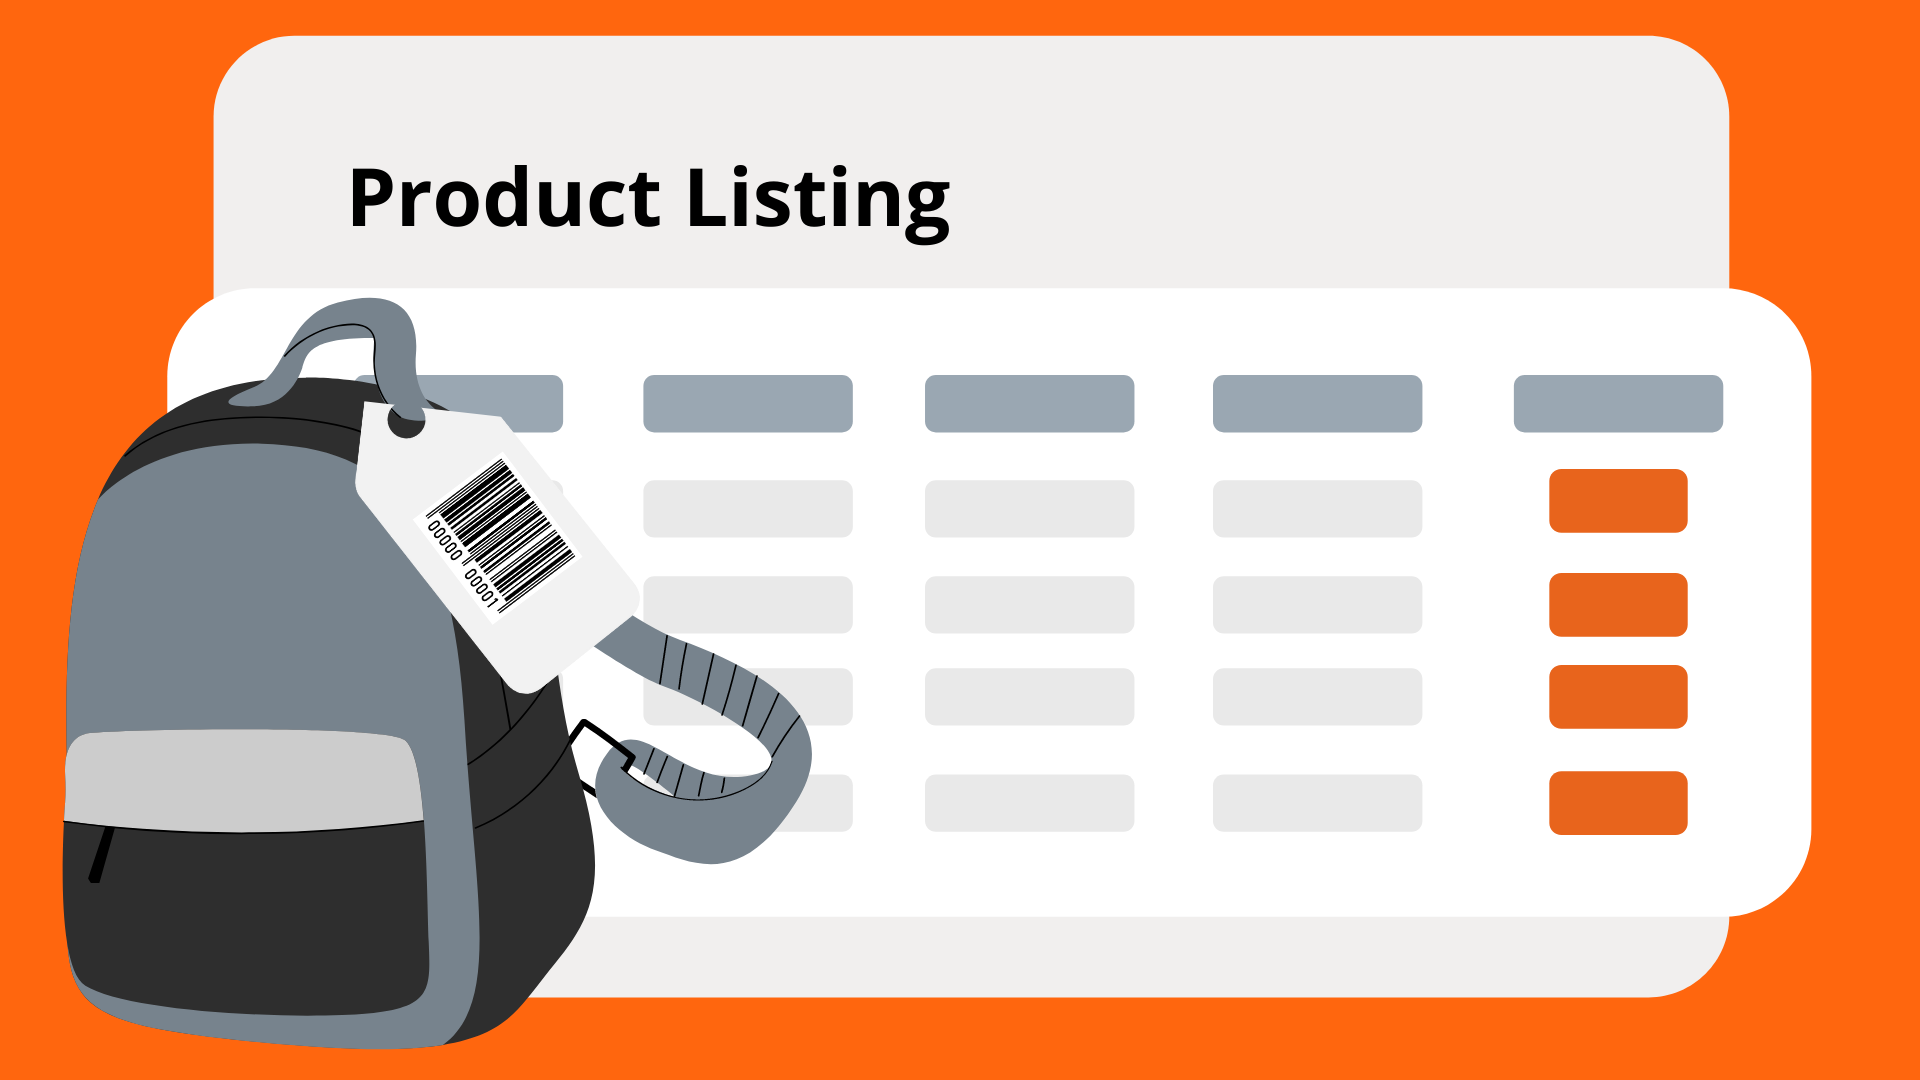 payrecon free 250 product listing for multichannel webstores